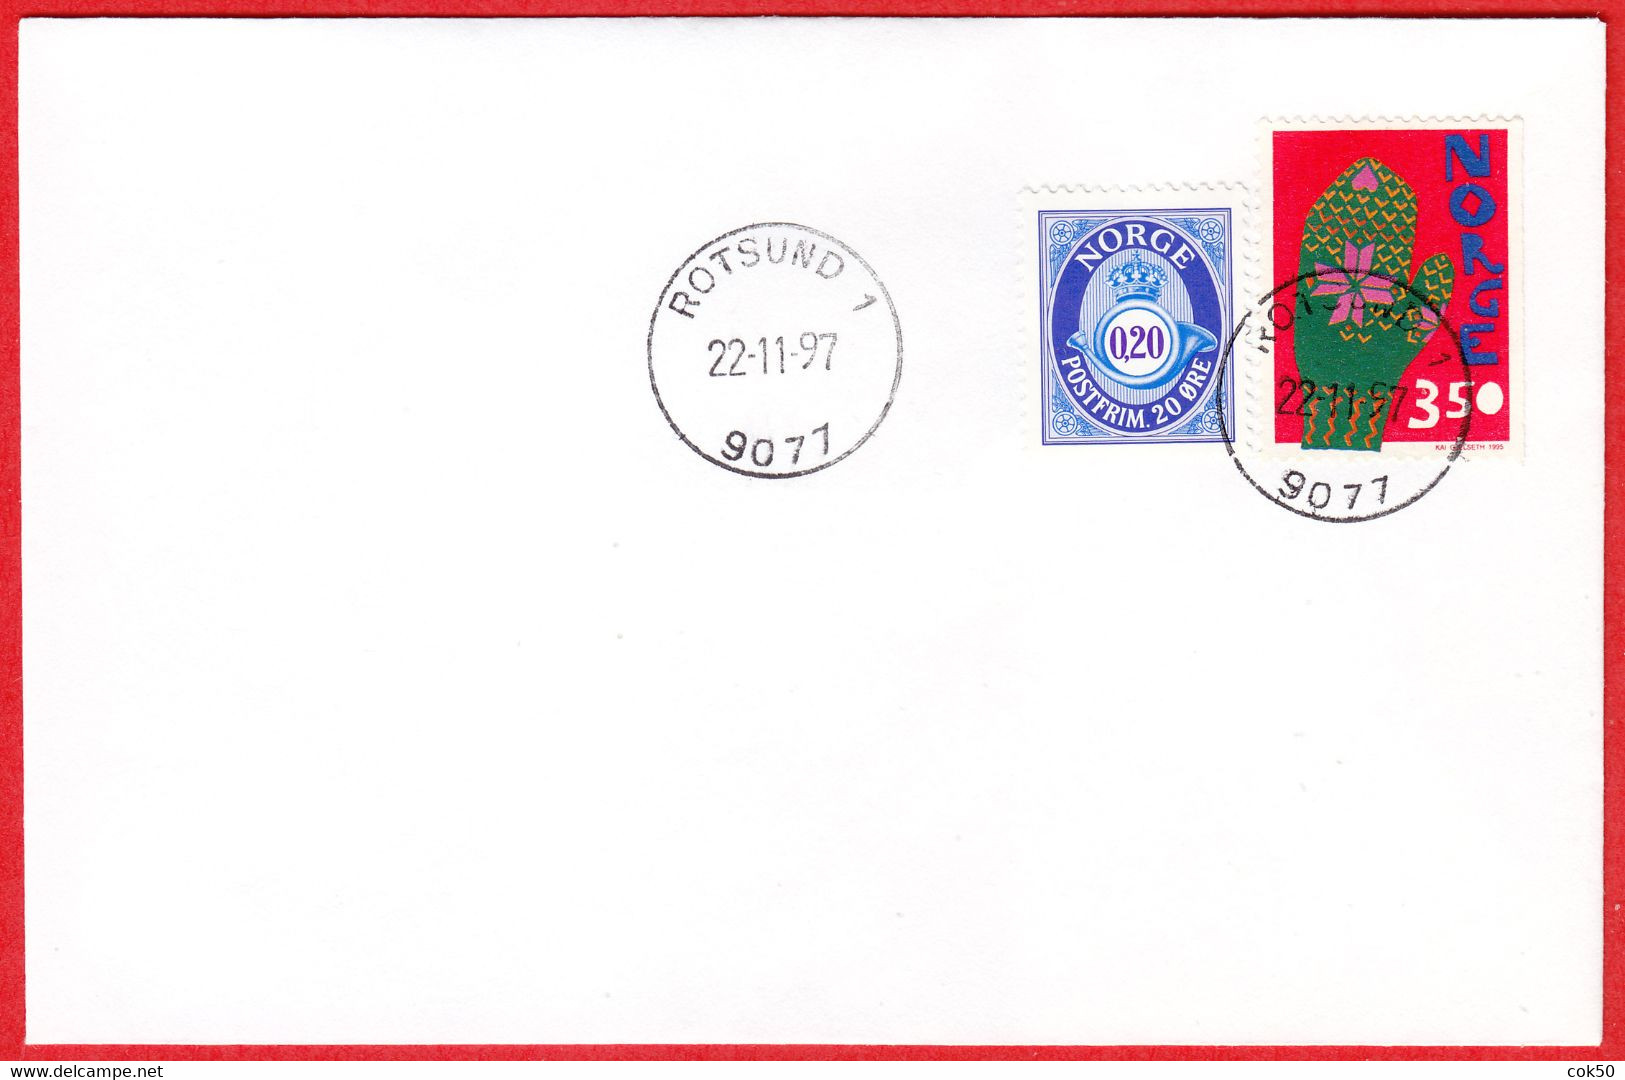 NORWAY -  9077 ROTSUND 1 (Troms County) - Last Day/postoffice Closed On 1997.11.22 - Local Post Stamps